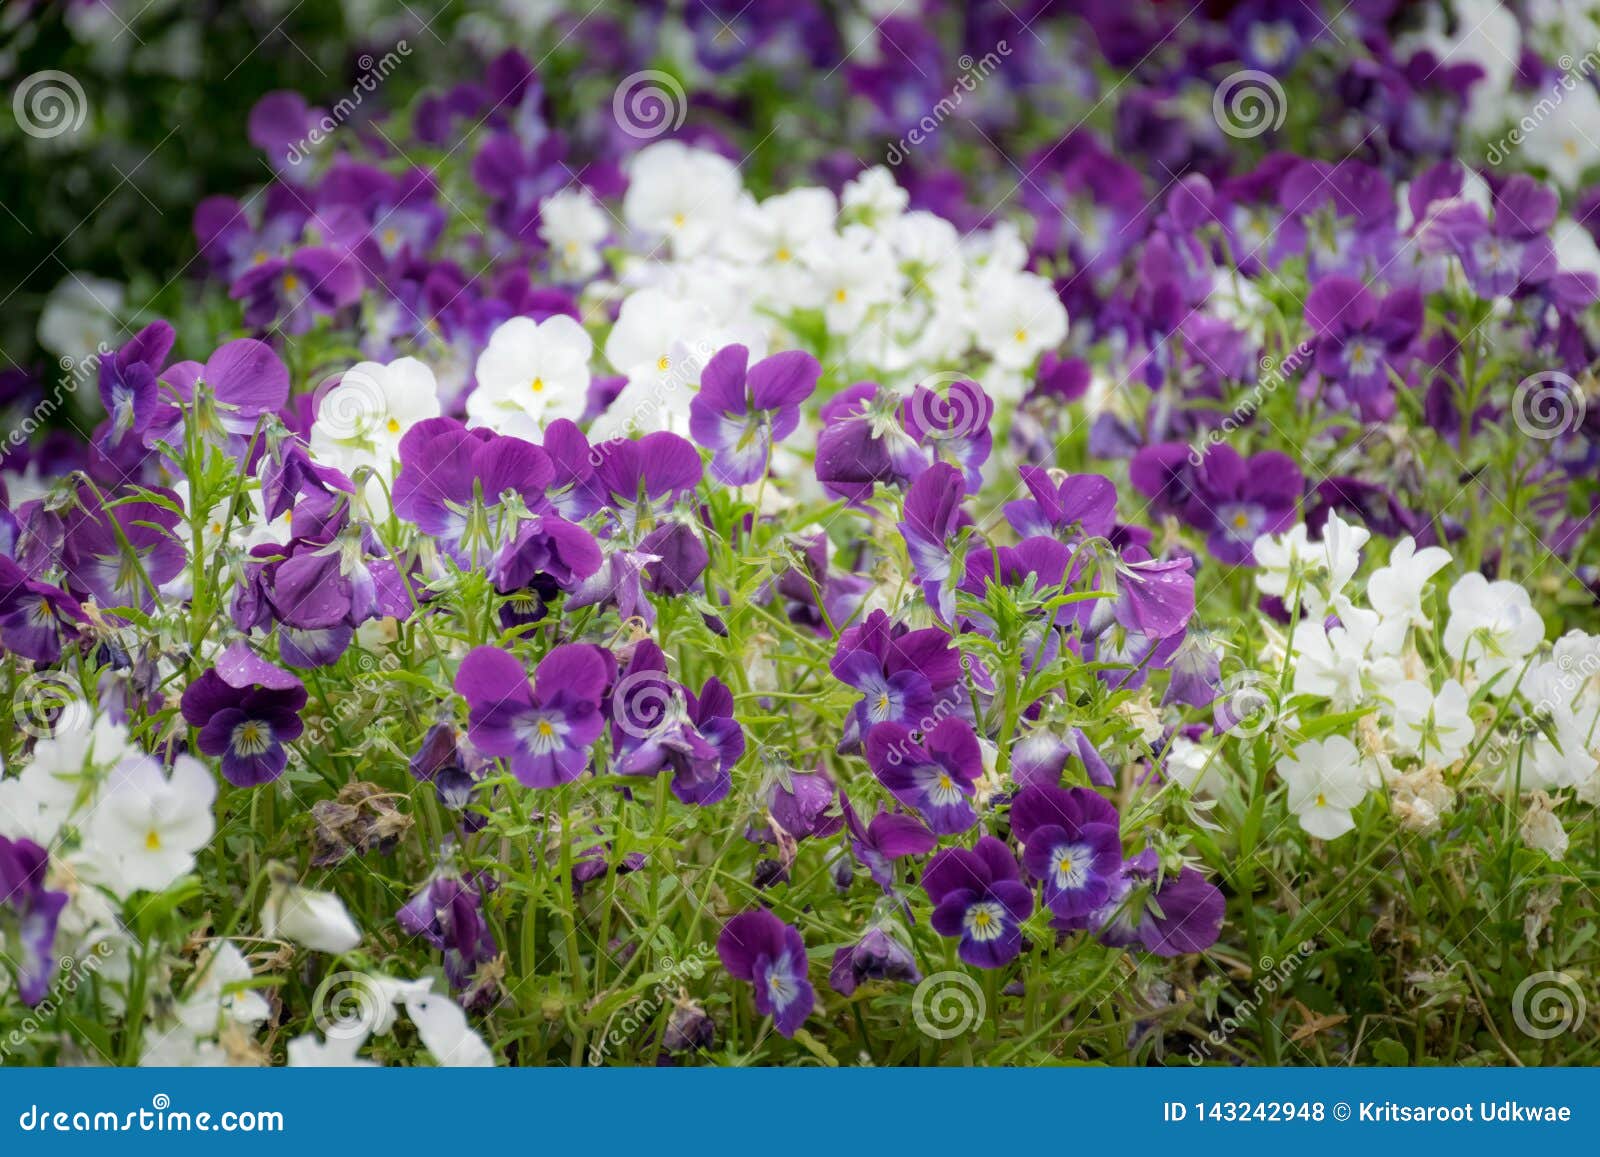 Purple and White Viola Flowers in the Garden. Stock Photo - Image of ...